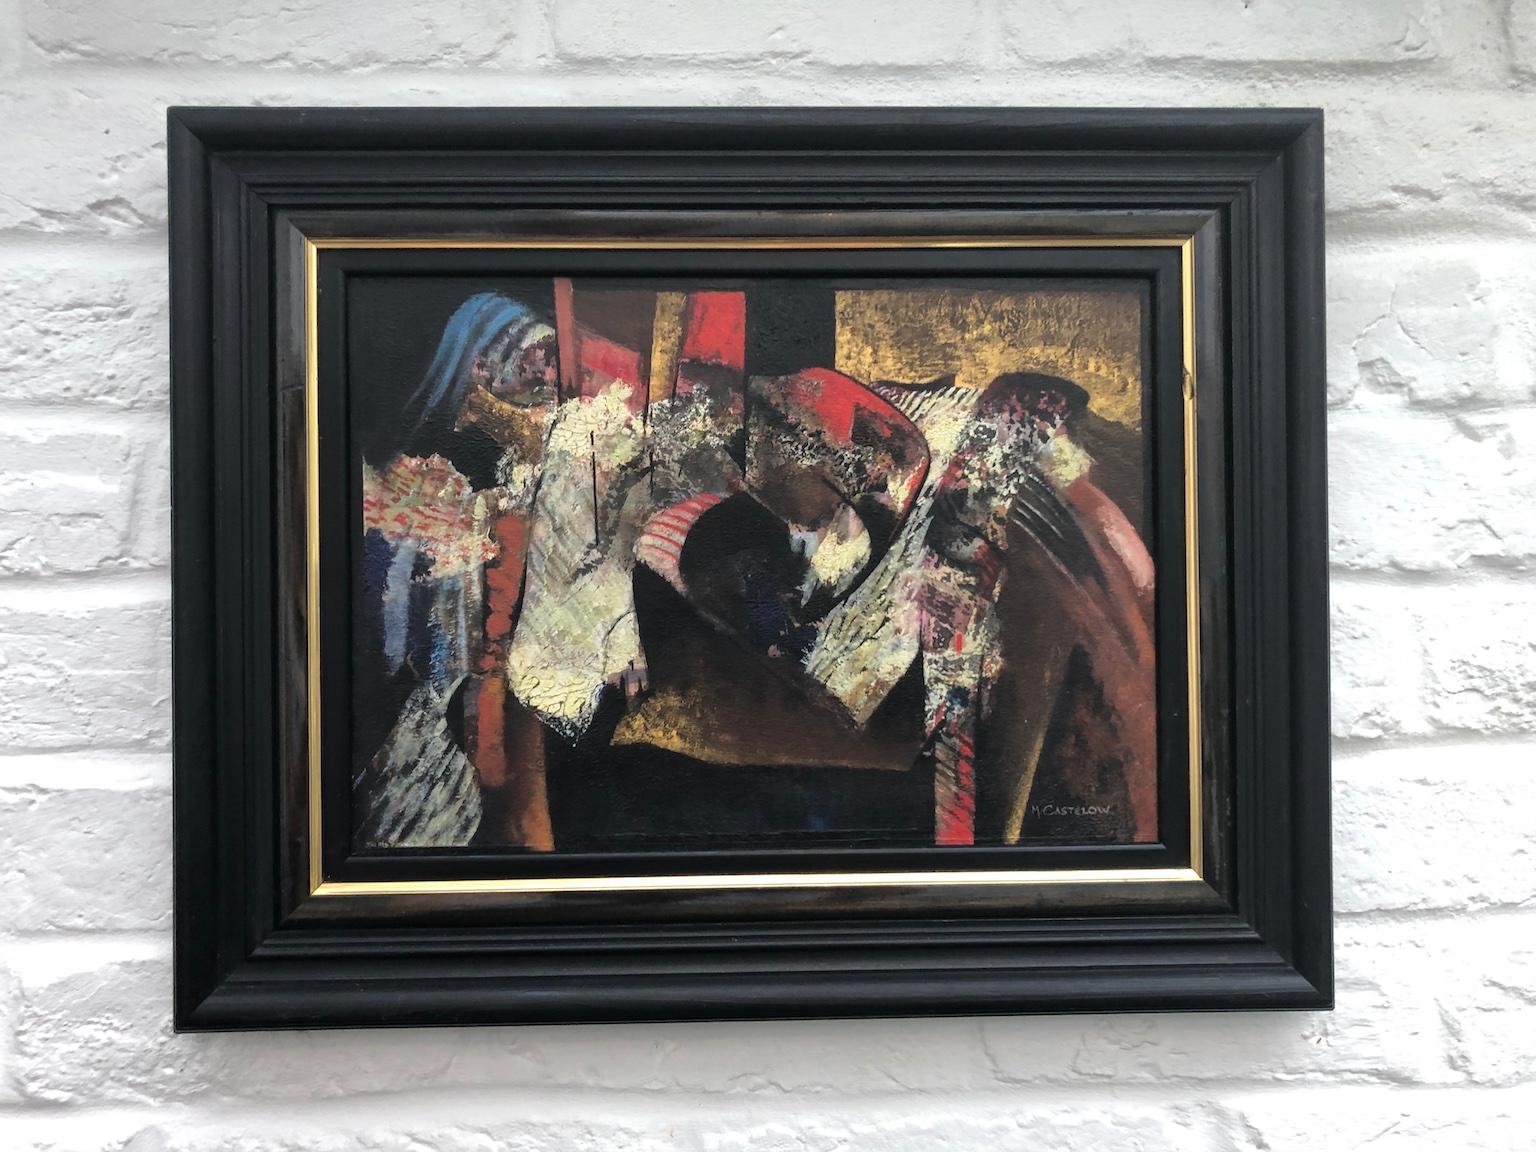 Abstract oil painting by Margaret Castelow, ‘The Dressing Room’, circa 1980

Exquisite abstract oil painting by British artist Margaret Castelow, beautifully executed, entitled ‘The Dressing Room’, signed.

Complemented by triple layer wooden